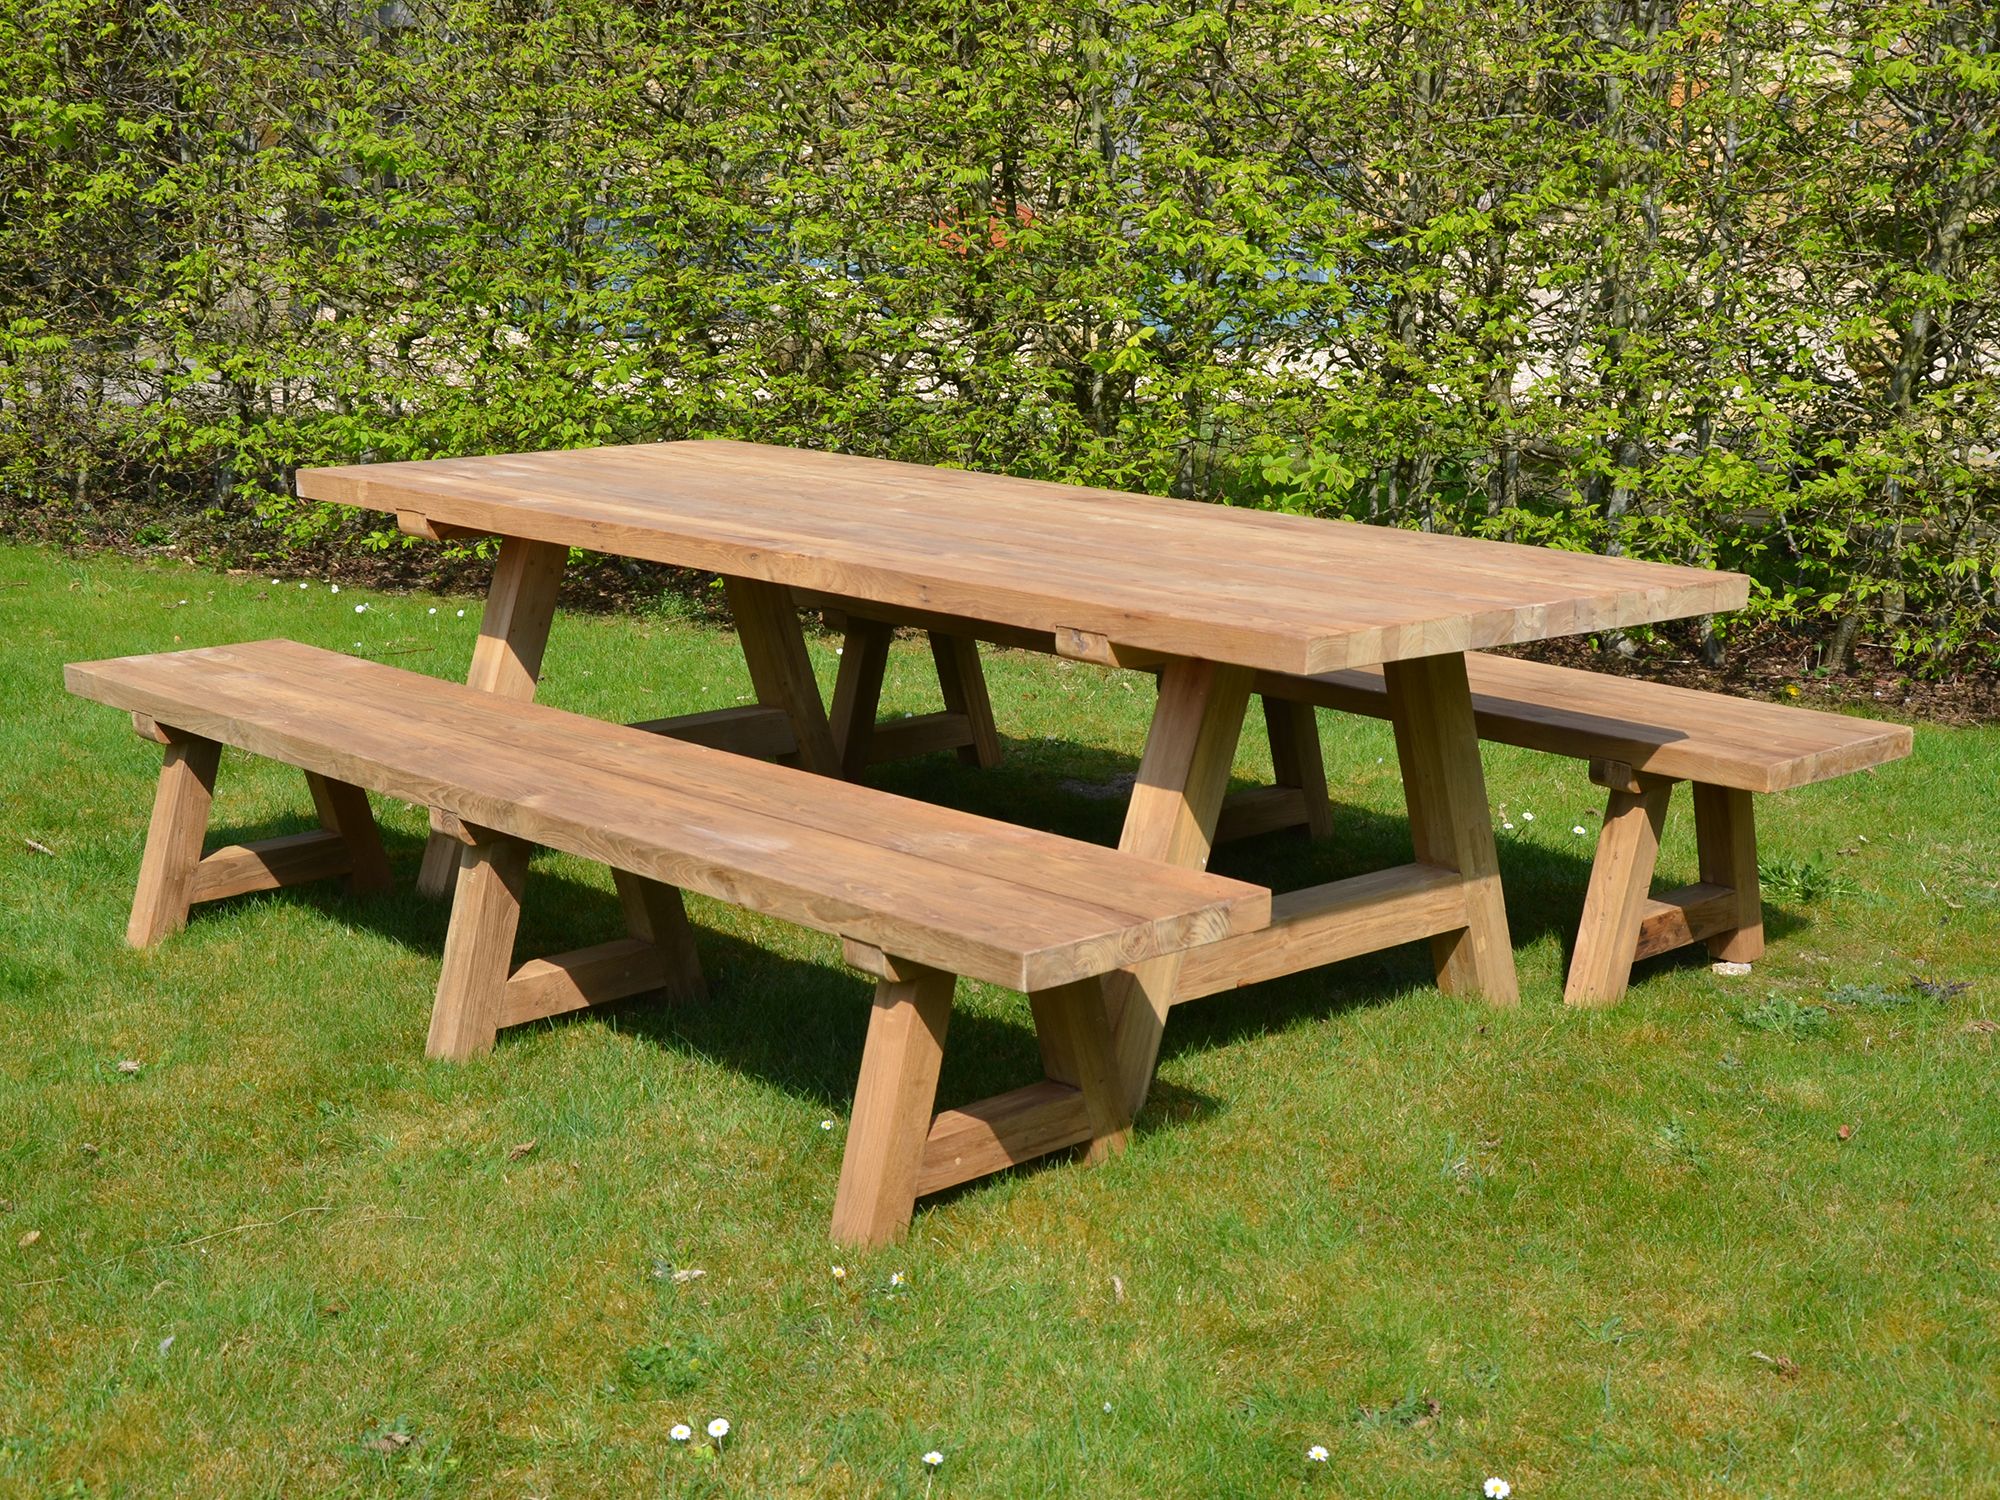 The Wooden Garden Table And Benches Set Architectural Heritage